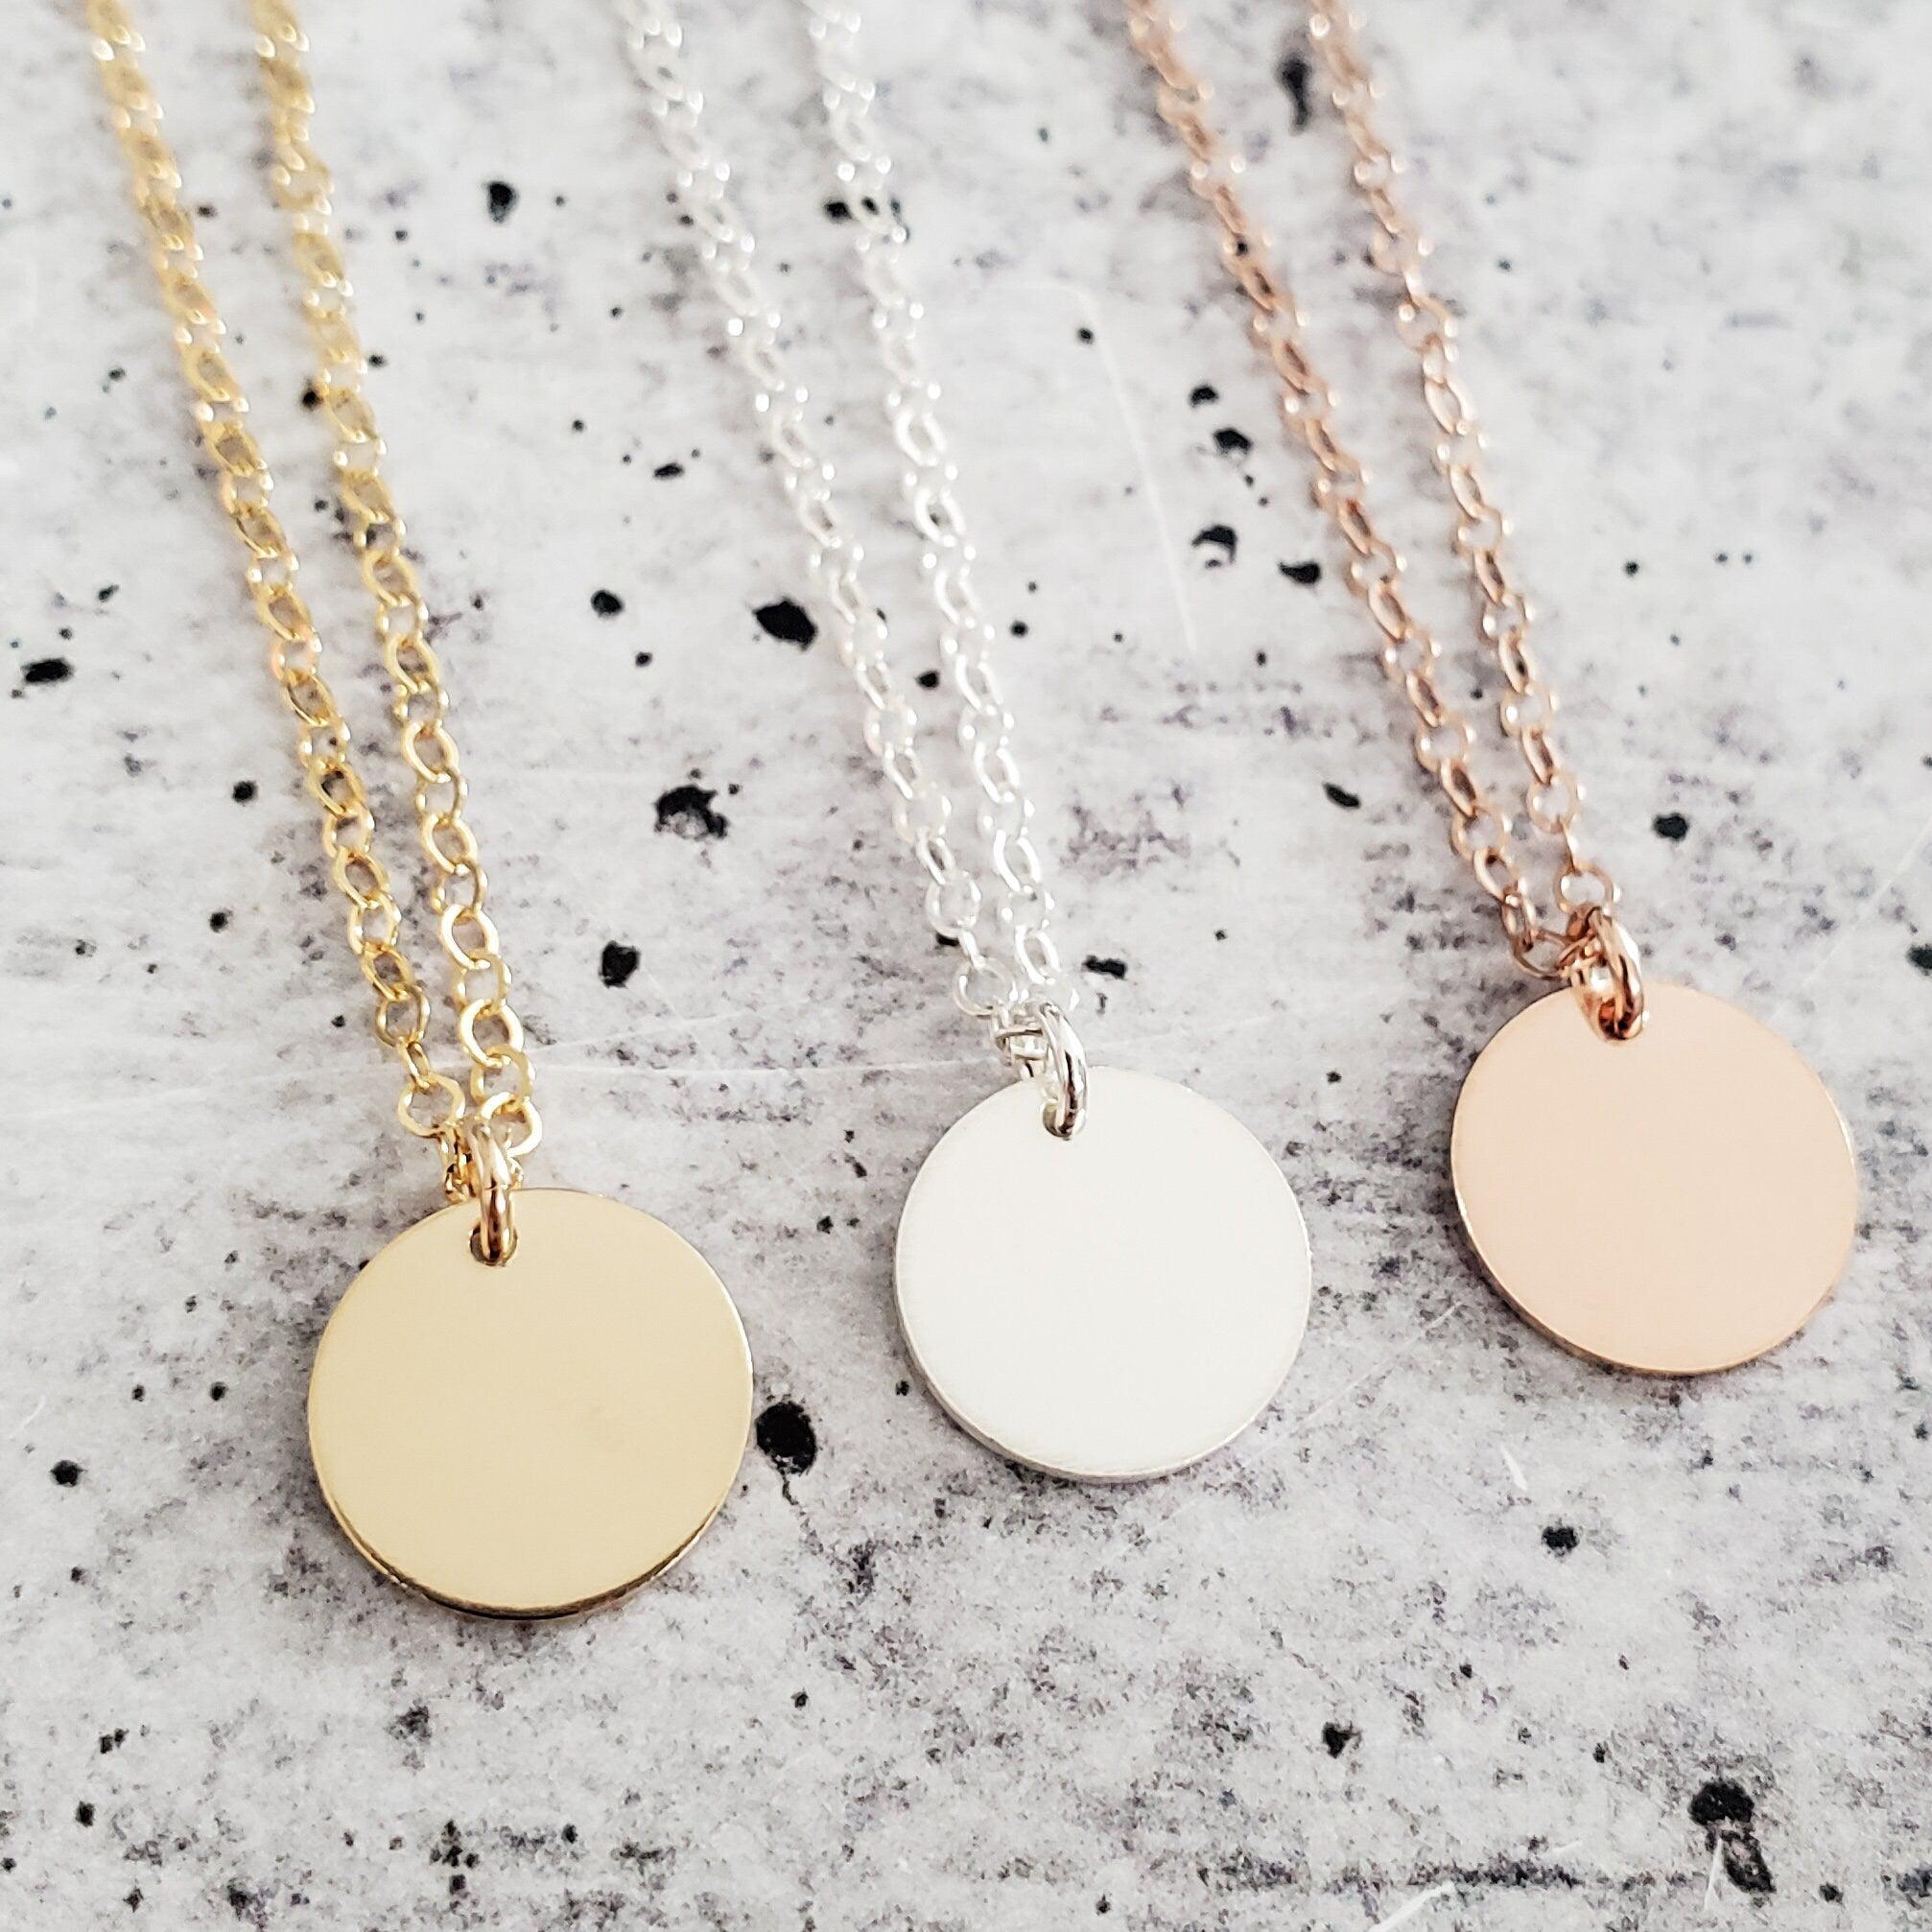 Moon and Sun Necklace - Minimalist Silver Boho Moon Child Charm Necklace - Initial Necklace for Minimalist - Rose Gold Teen Dainty Necklace